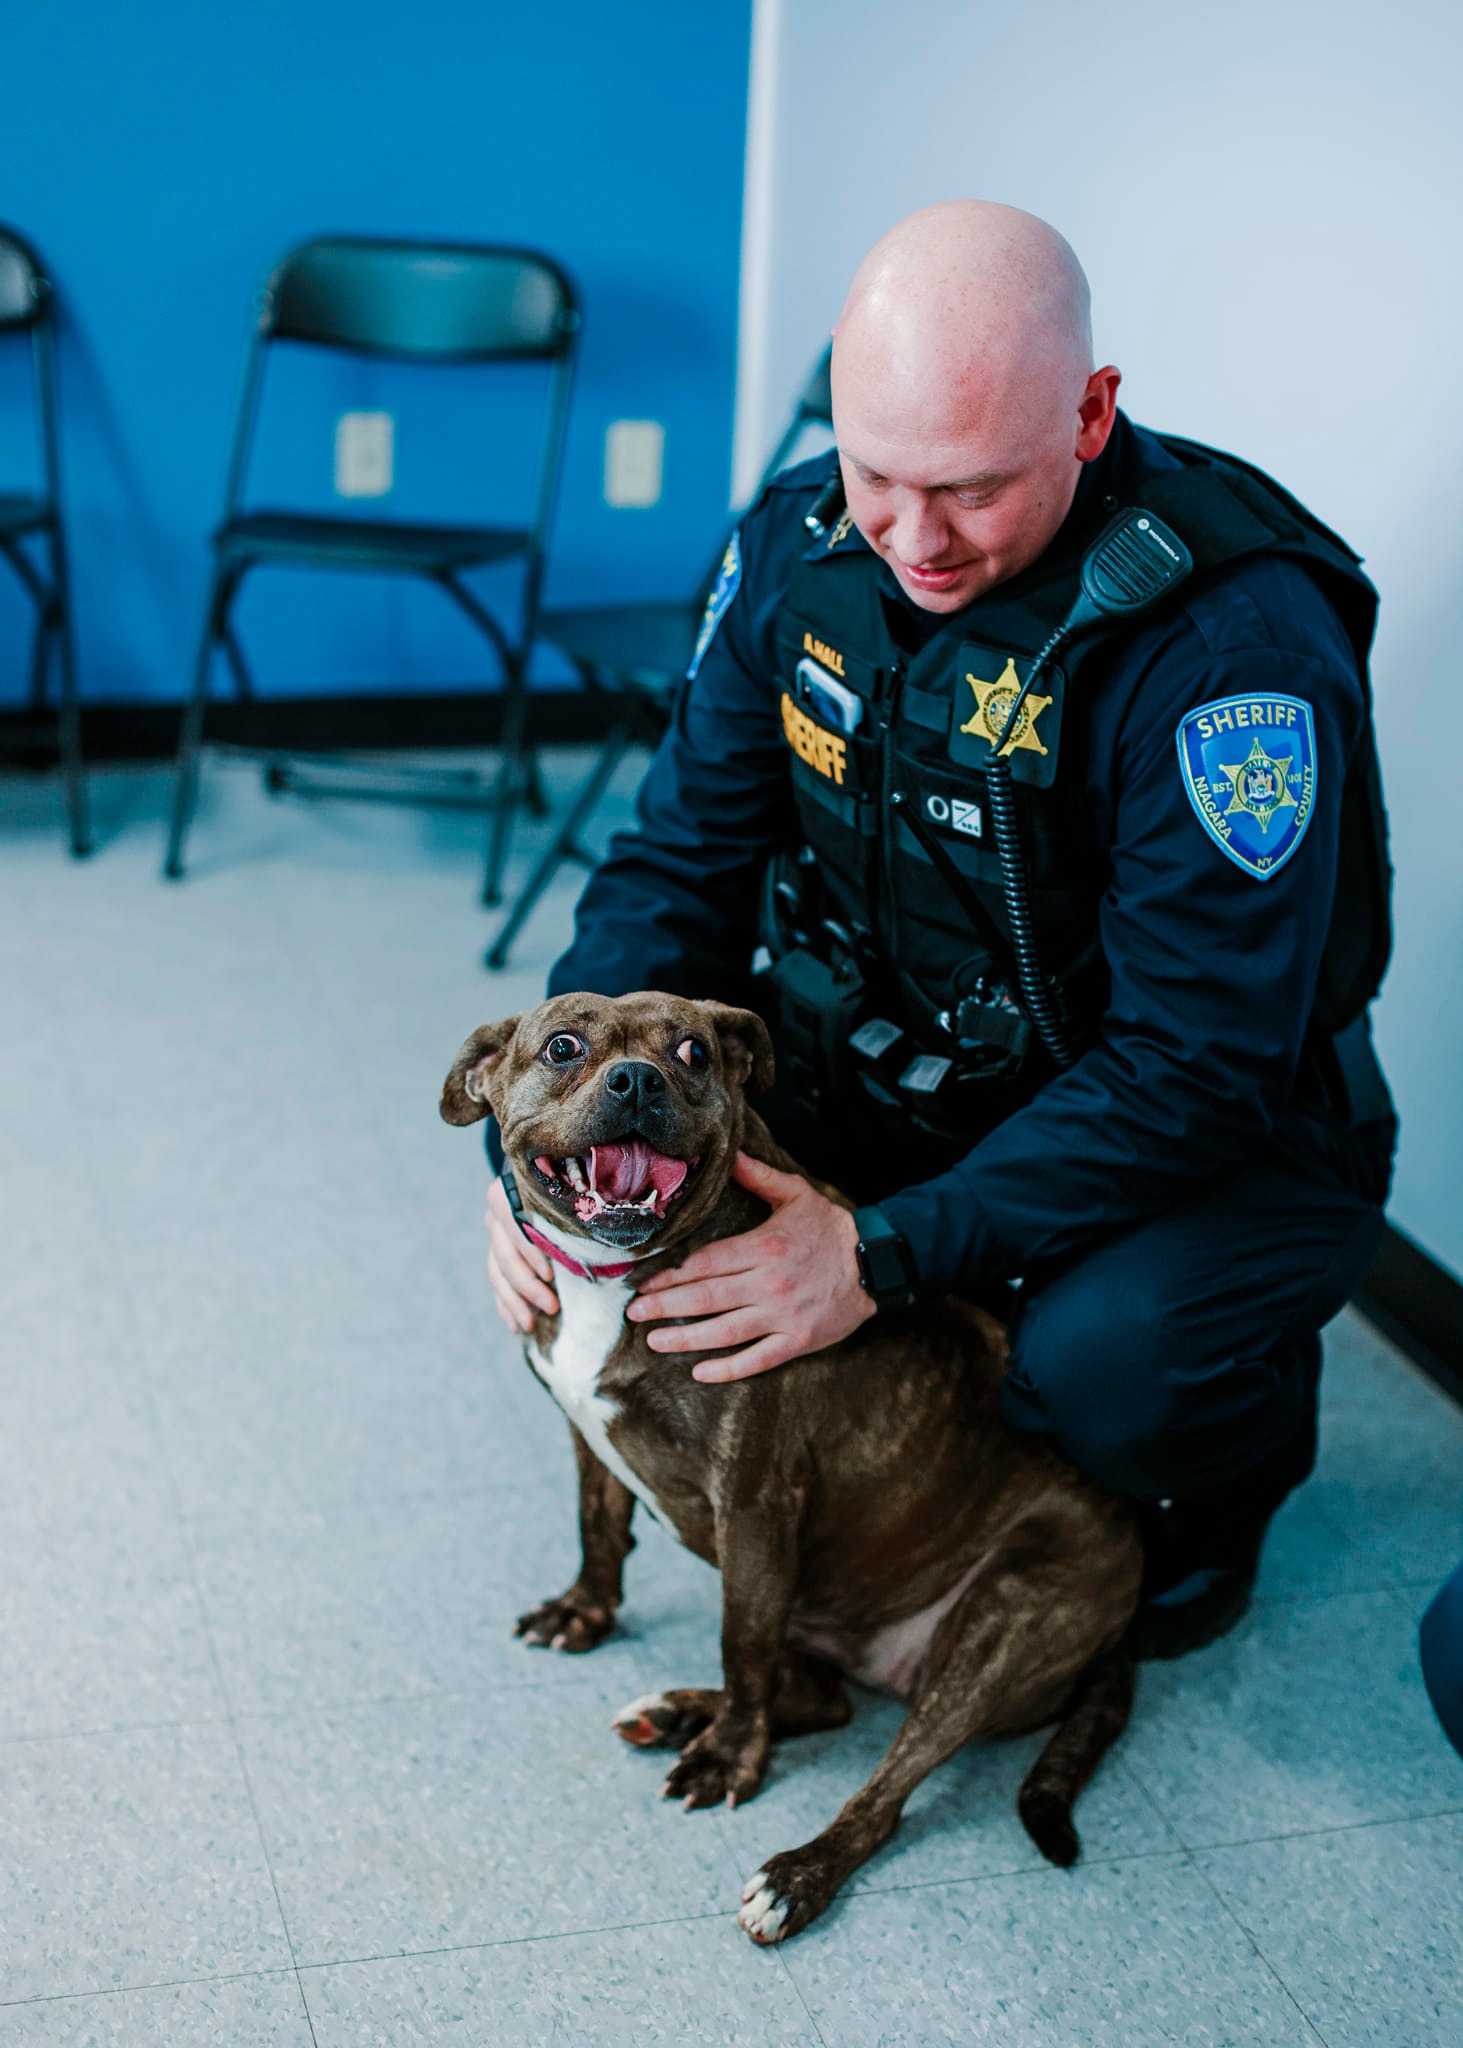 bald officer and dog